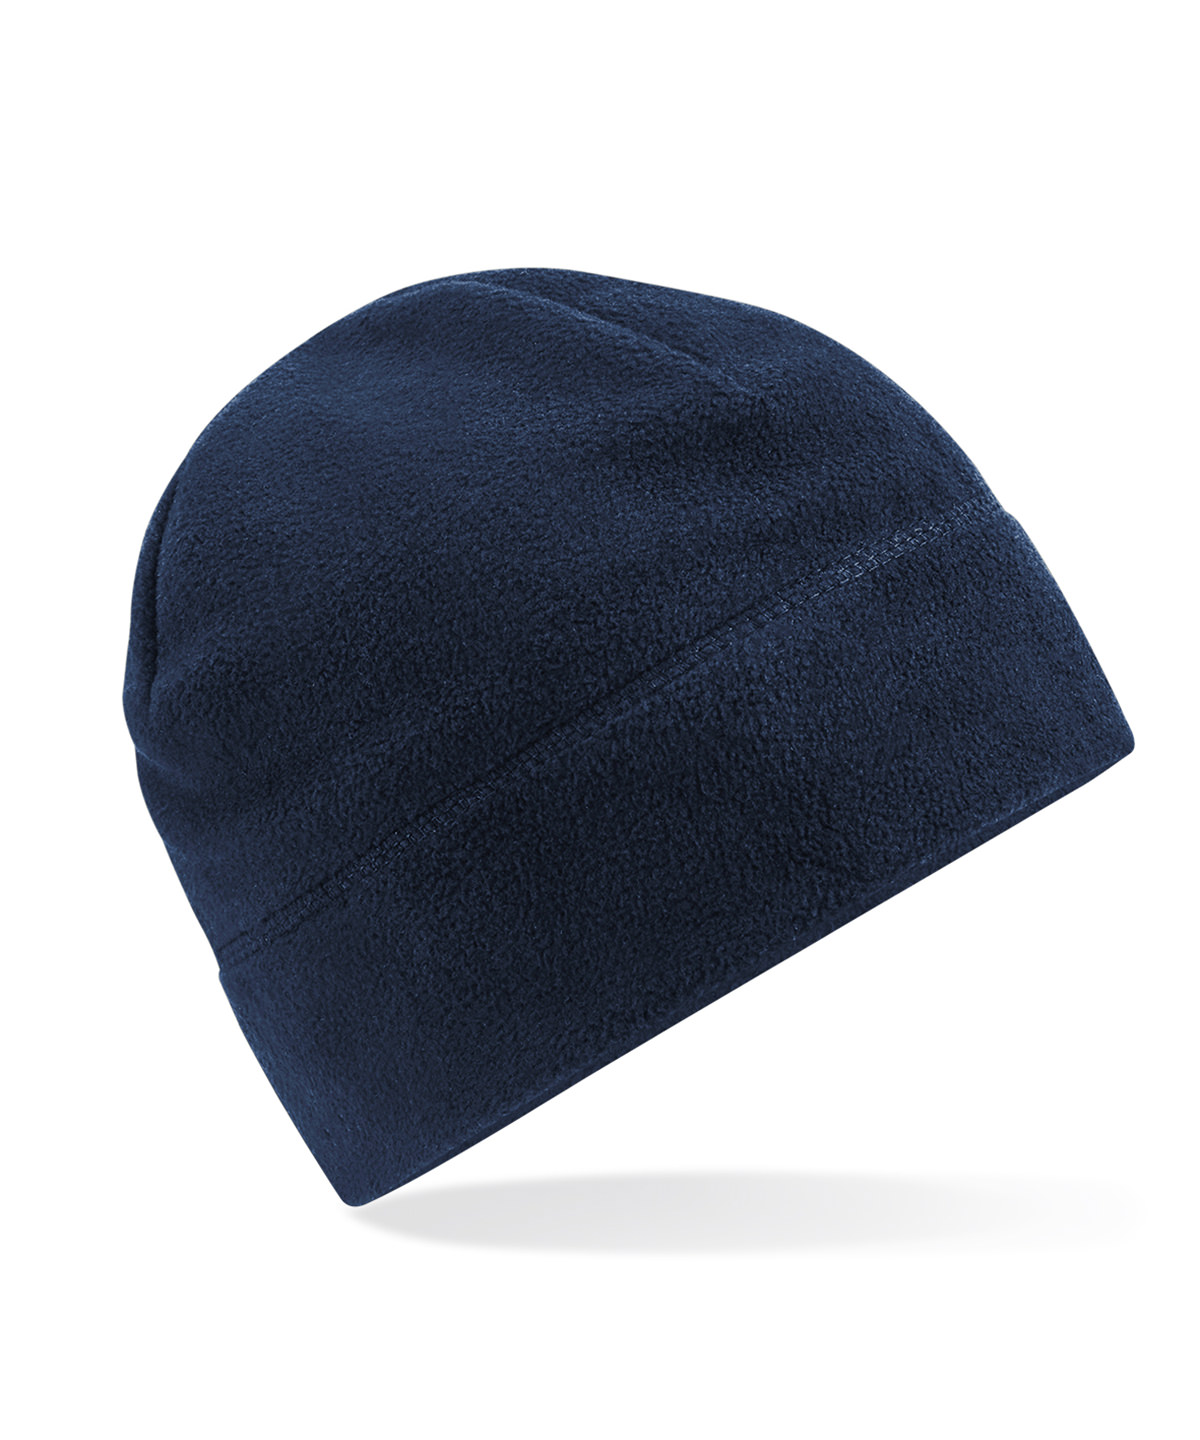 Recycled Fleece Pull-On Beanie French Navy Size One Size